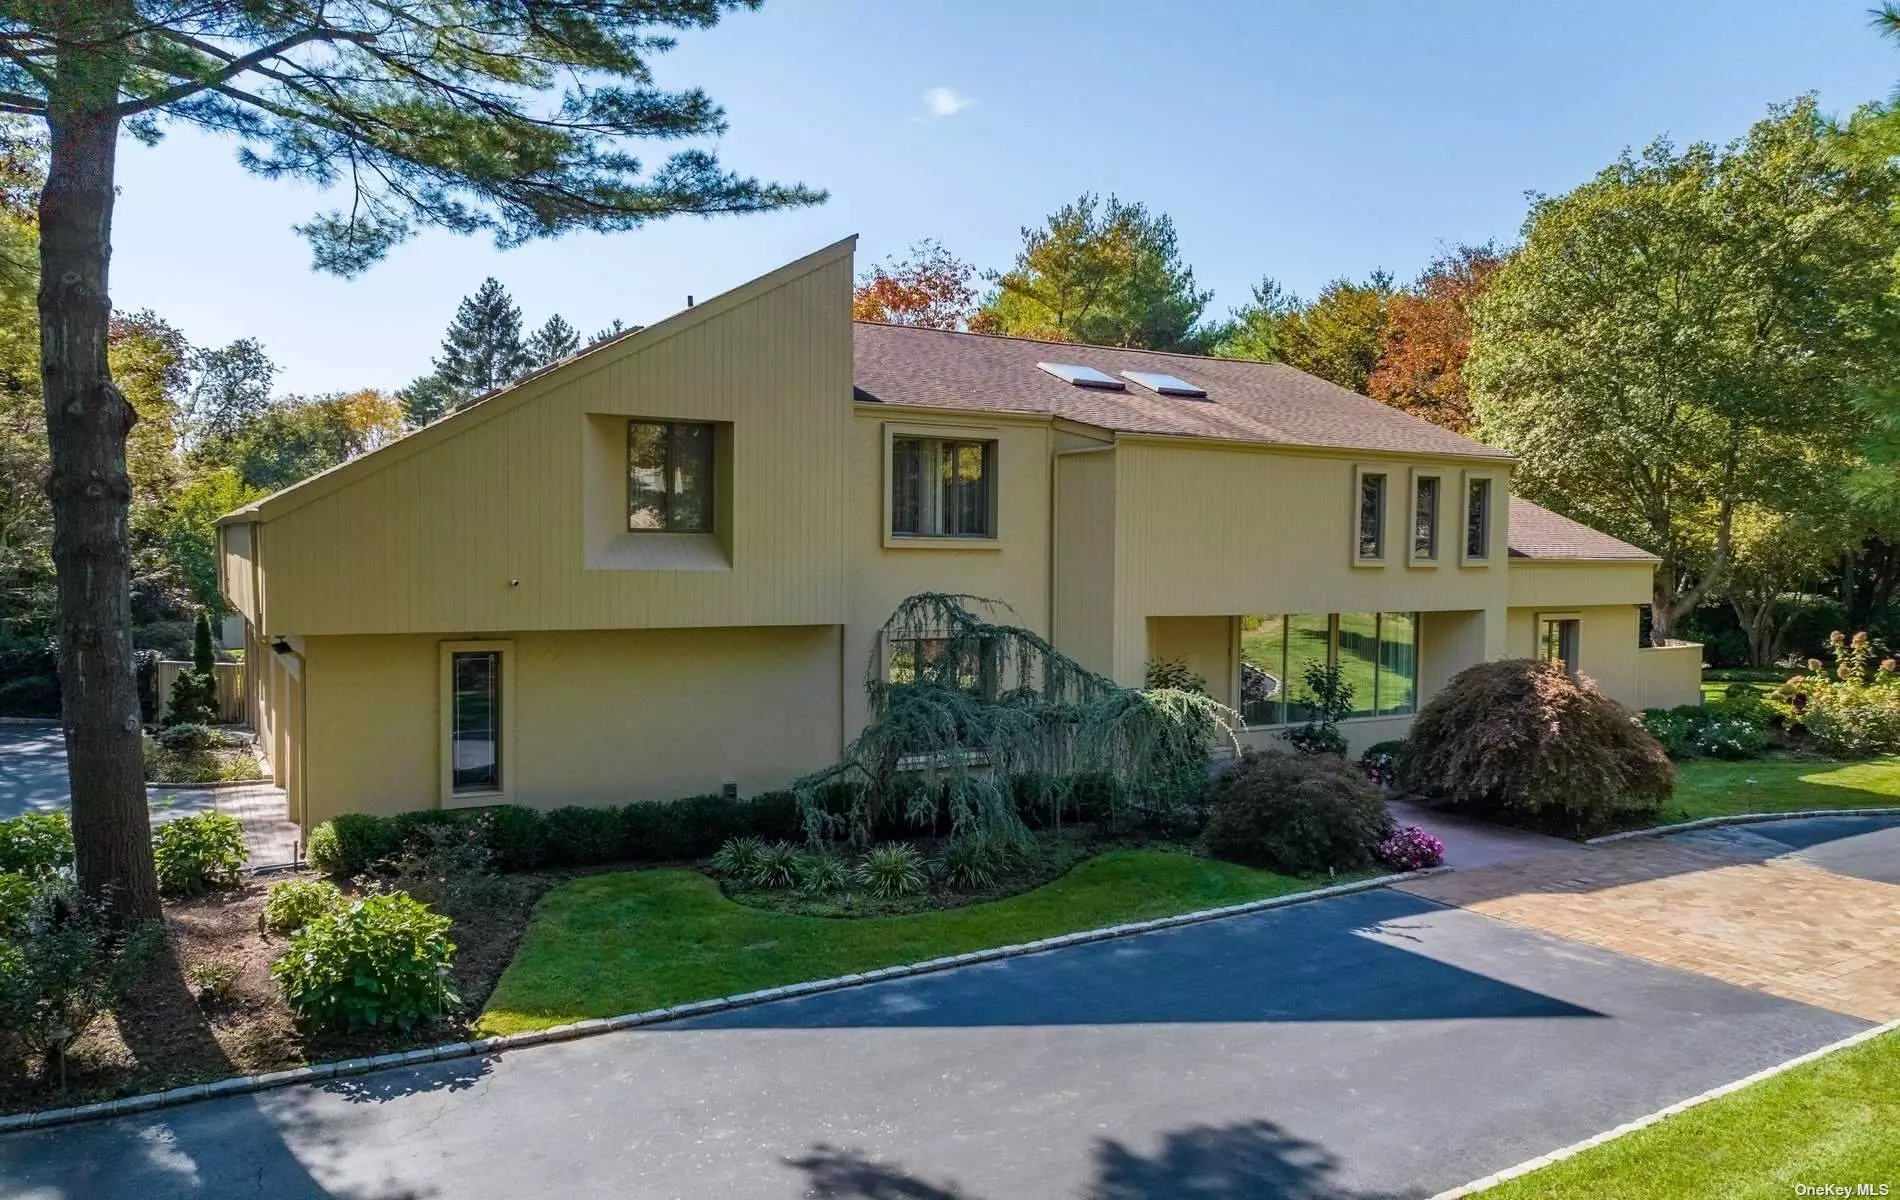 This meticulously maintained five bedroom home is located in the heart of Old Westbury on a quiet Cul-De-Sac. Highlights include hardwood floors, fireplace, new kitchen cabinets,  new storage cabinetry and new epoxy flooring in the three-car garage. Private bedroom suite and separate study on the main level. The two acre property is a Shangri la with a Koi pond fed by a waterfall, new cedar deck, newly resurfaced har tru tennis court and sparkling in-ground pool. Three car-garage, Generator. Ideal location with close proximity to the famed Americana Shopping, golf, the beach, horse trails and only 40 minutes to NYC and the airport. Jericho School District.